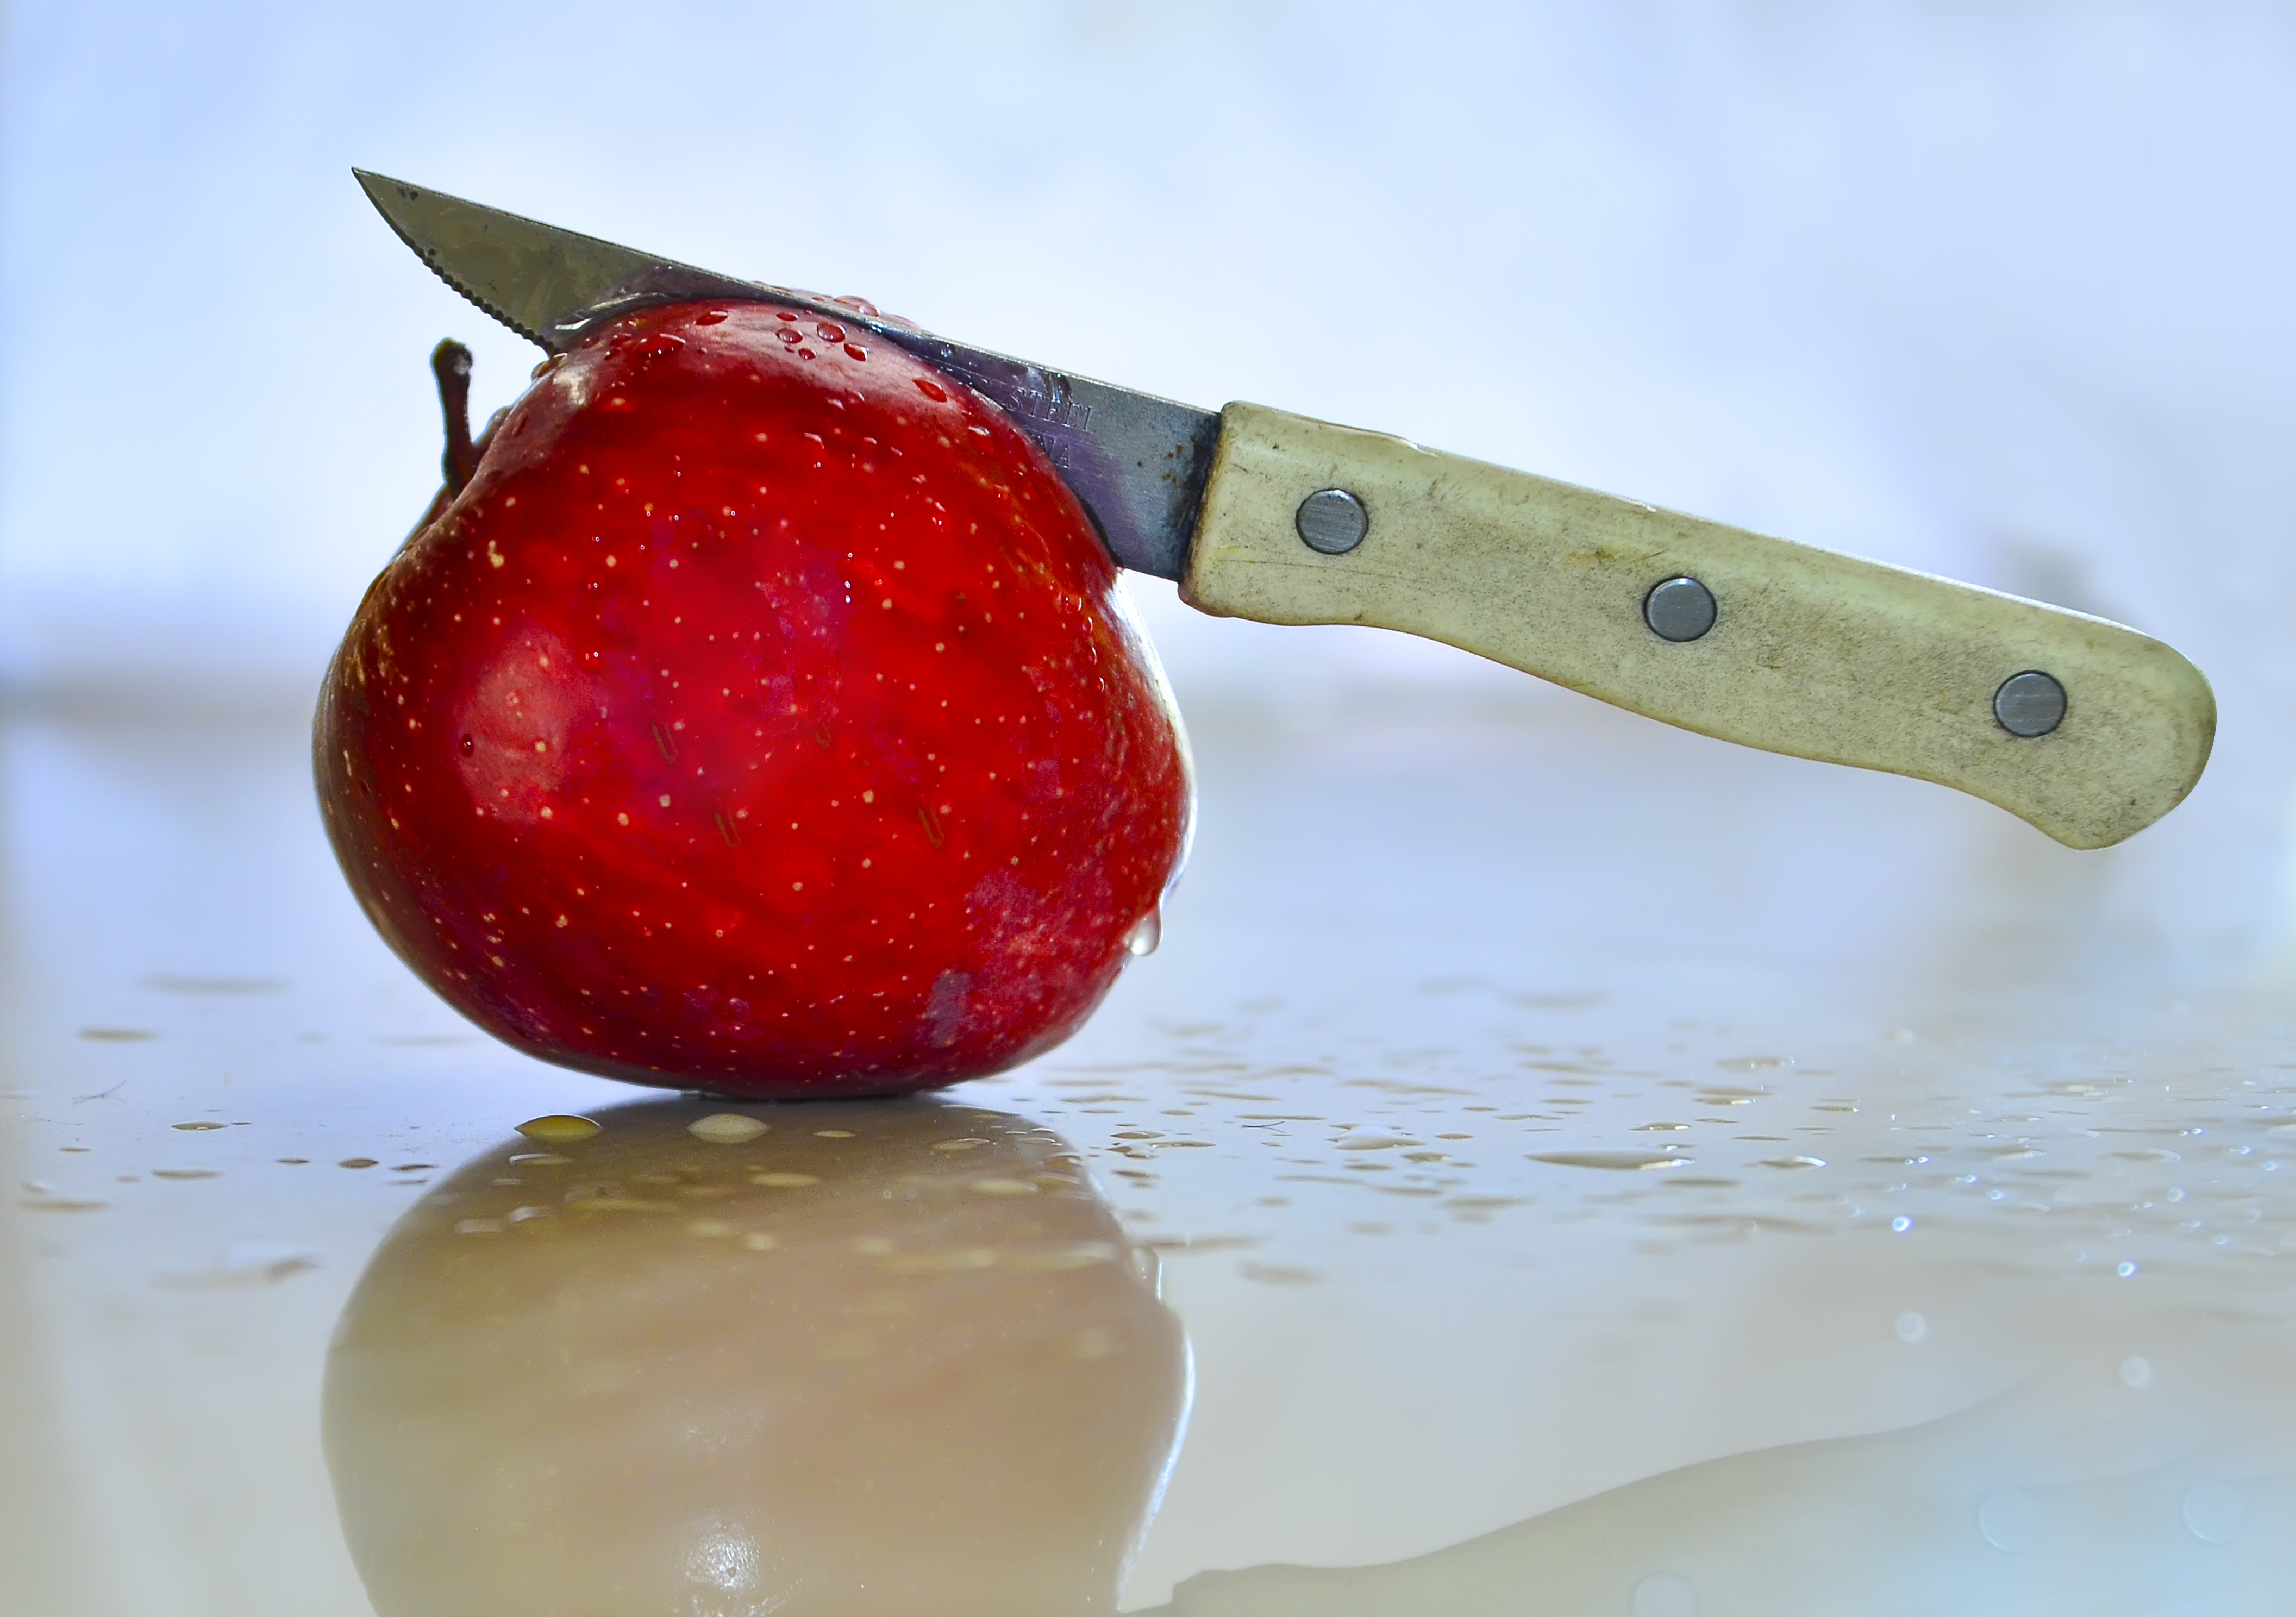 Knife in Apple, Apple, Cutting, Food, Fruits, HQ Photo